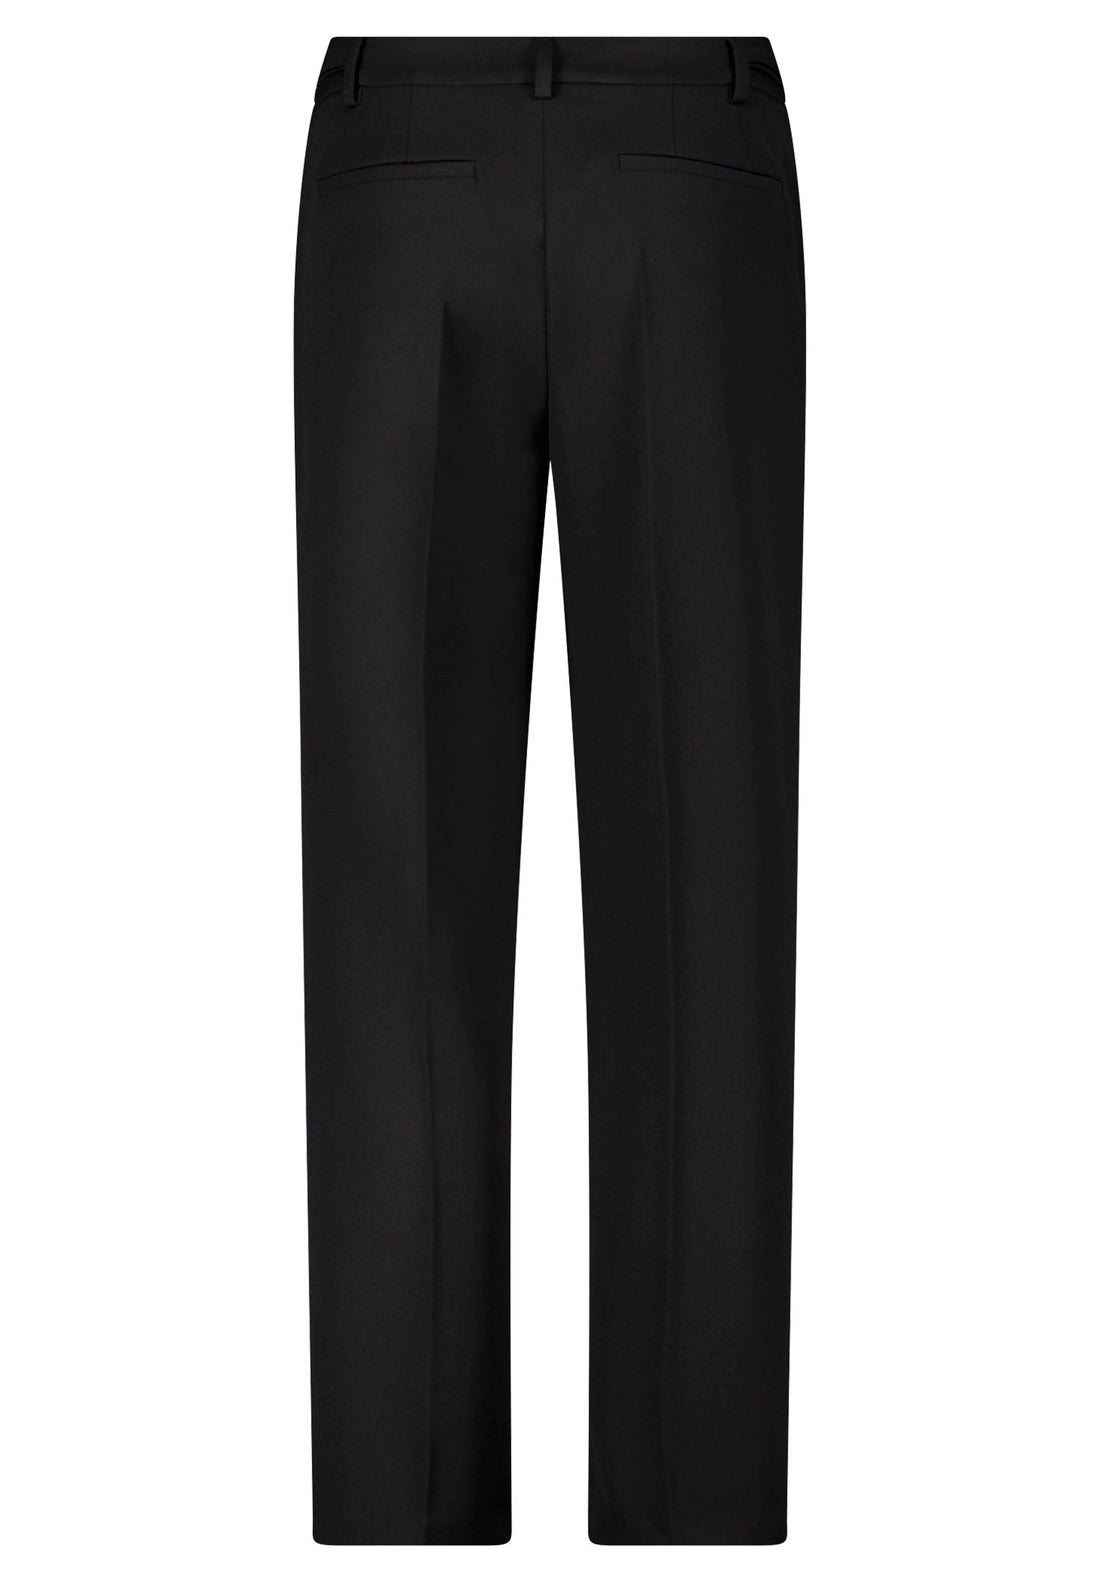 Black Dress Trousers With Center Pleat_6831-1055_9045_02